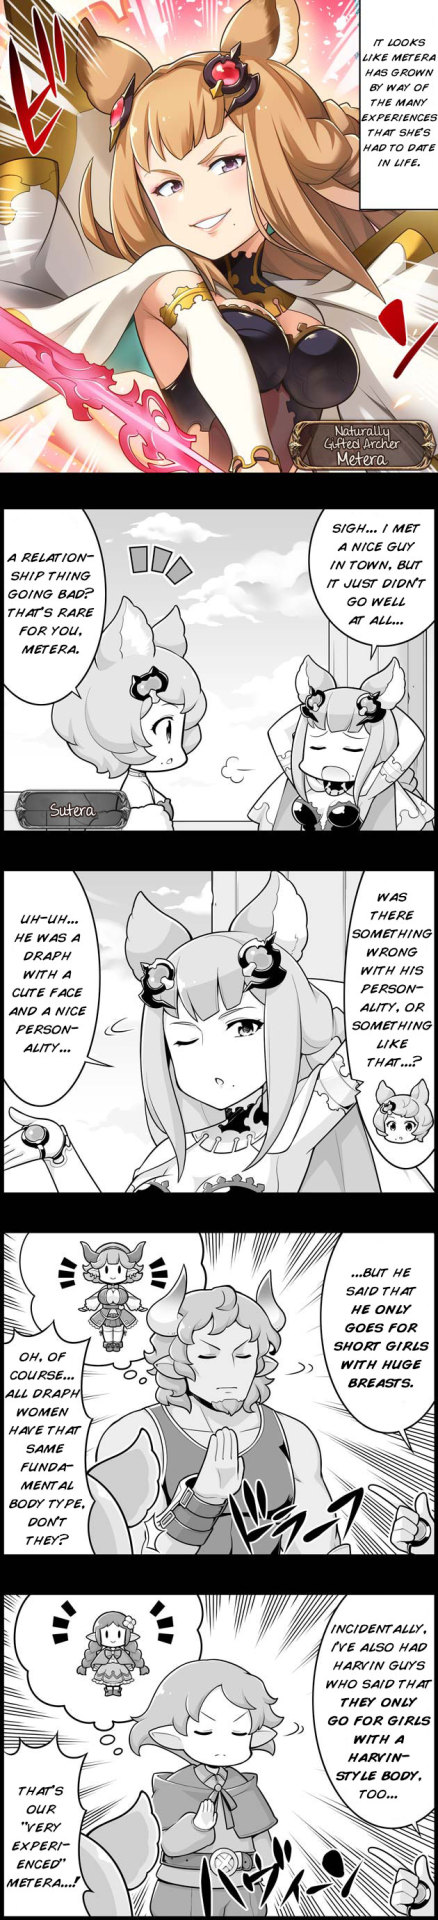 Grand Blues! Ch. 1176 Metera’s Experience Points